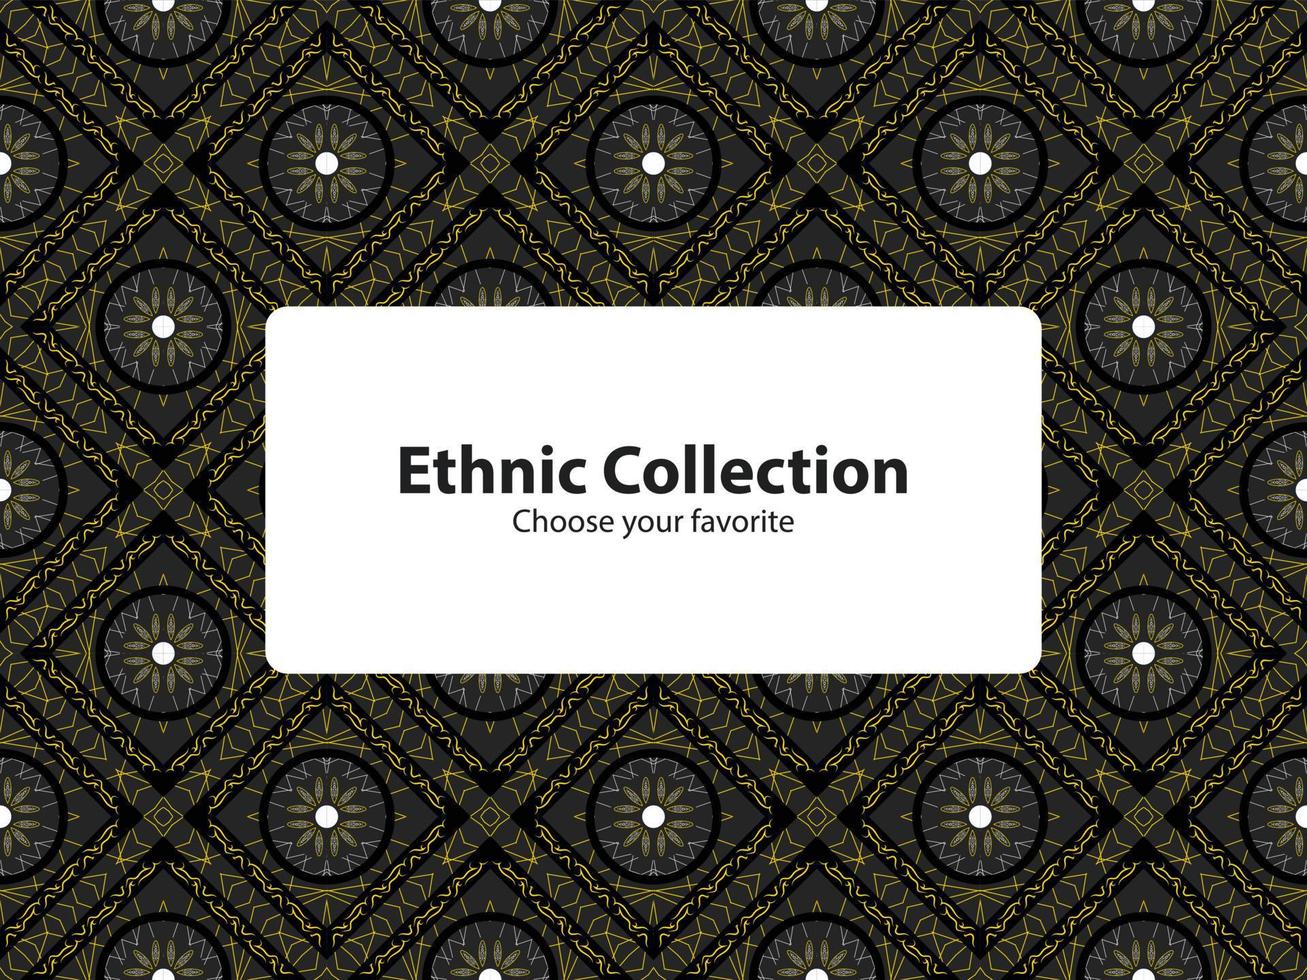 batik pattern traditional indonesia motif java culture backdrop background wallpaper geometry color seamless template paper fashion creative vintage design texture fabric artistic asian shape ethnic vector